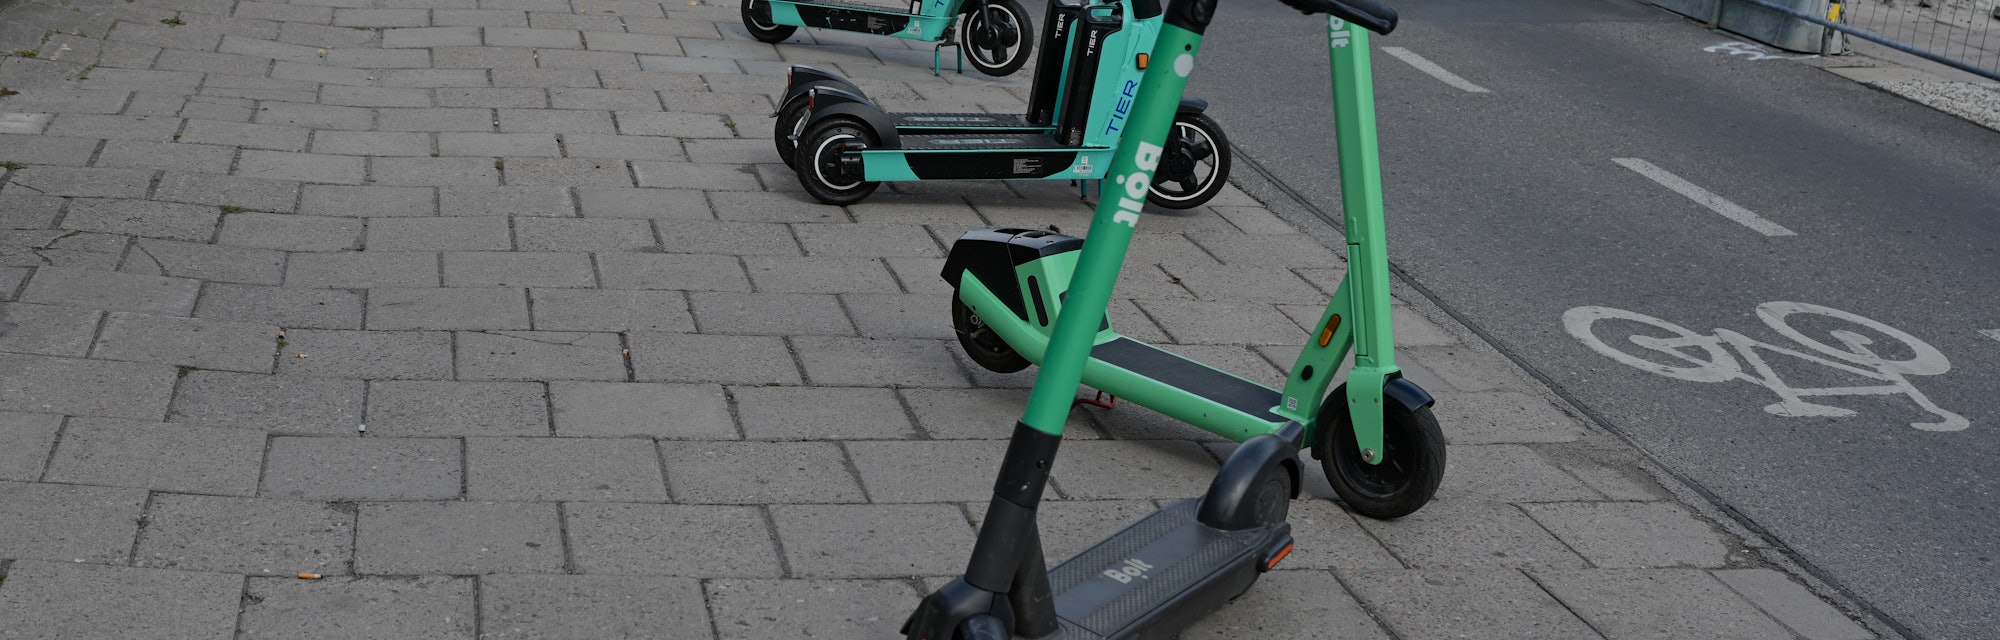 STOCKHOLM, SWEDEN - August 15, 2021: Electric scooters parked on pavement is Stockholm, Sweden.  The...